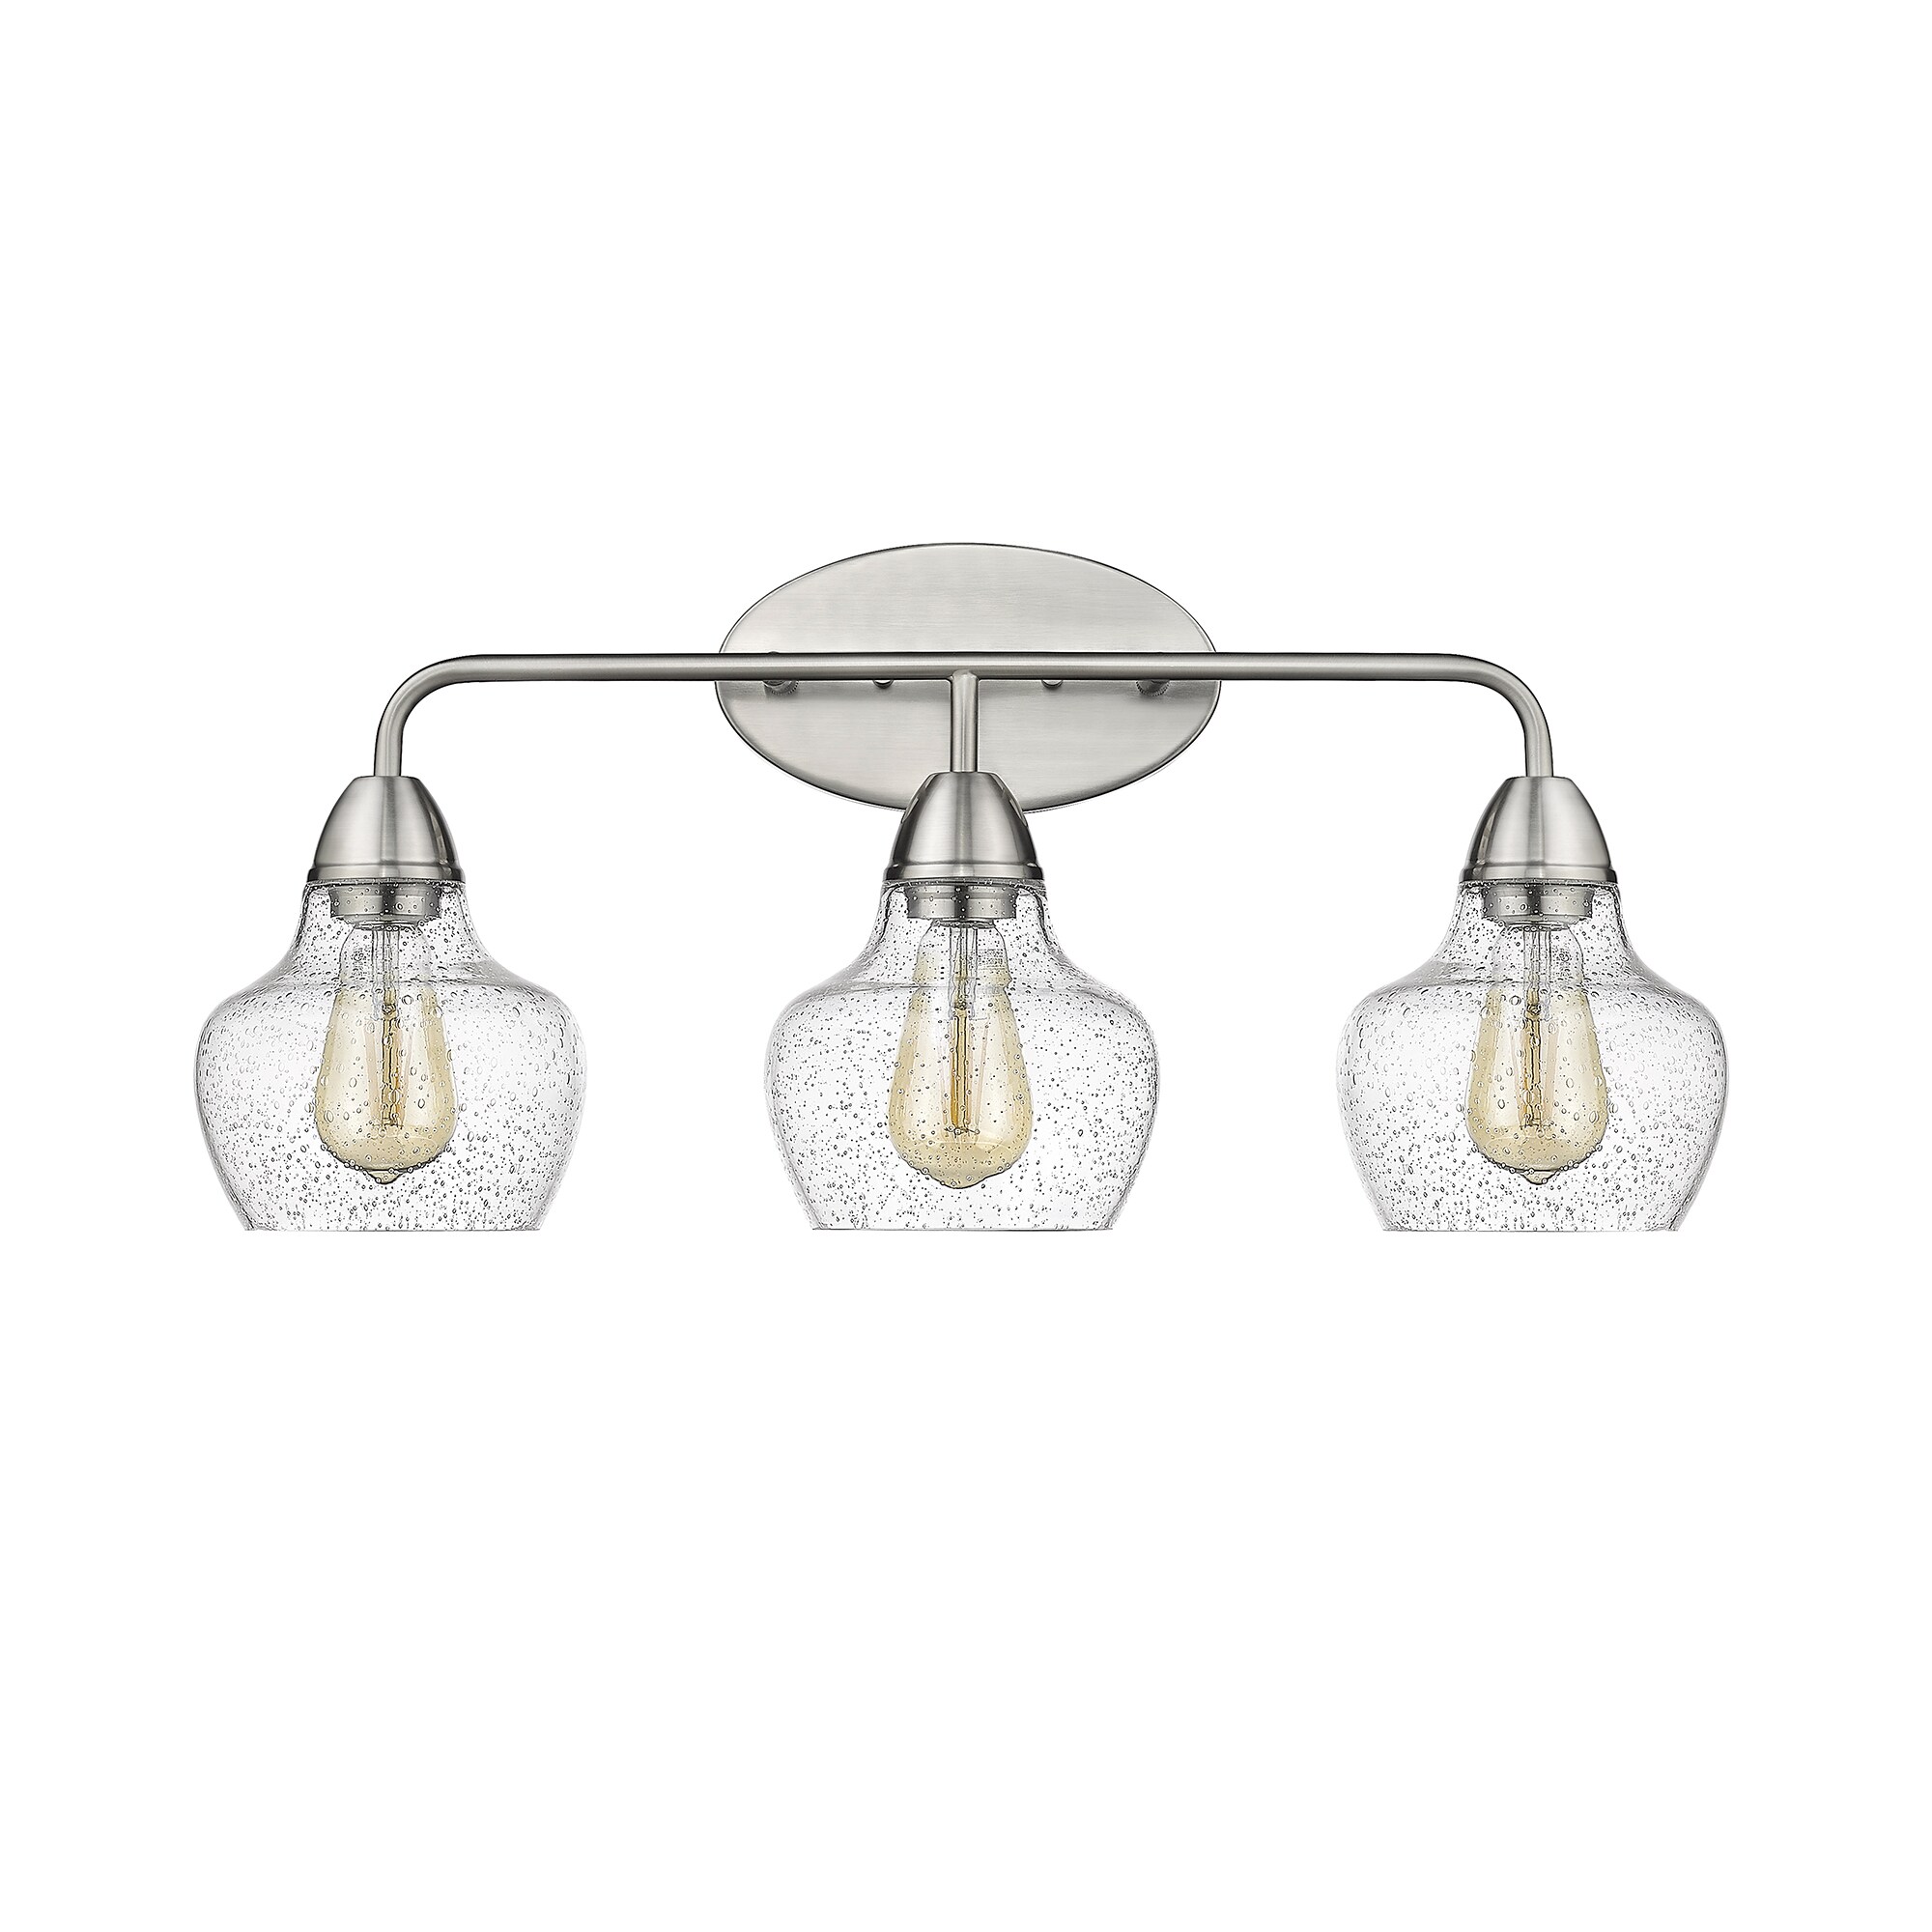 OVE Decors Norwich 24.44-in 3-Light Brushed Nickel LED Modern ...